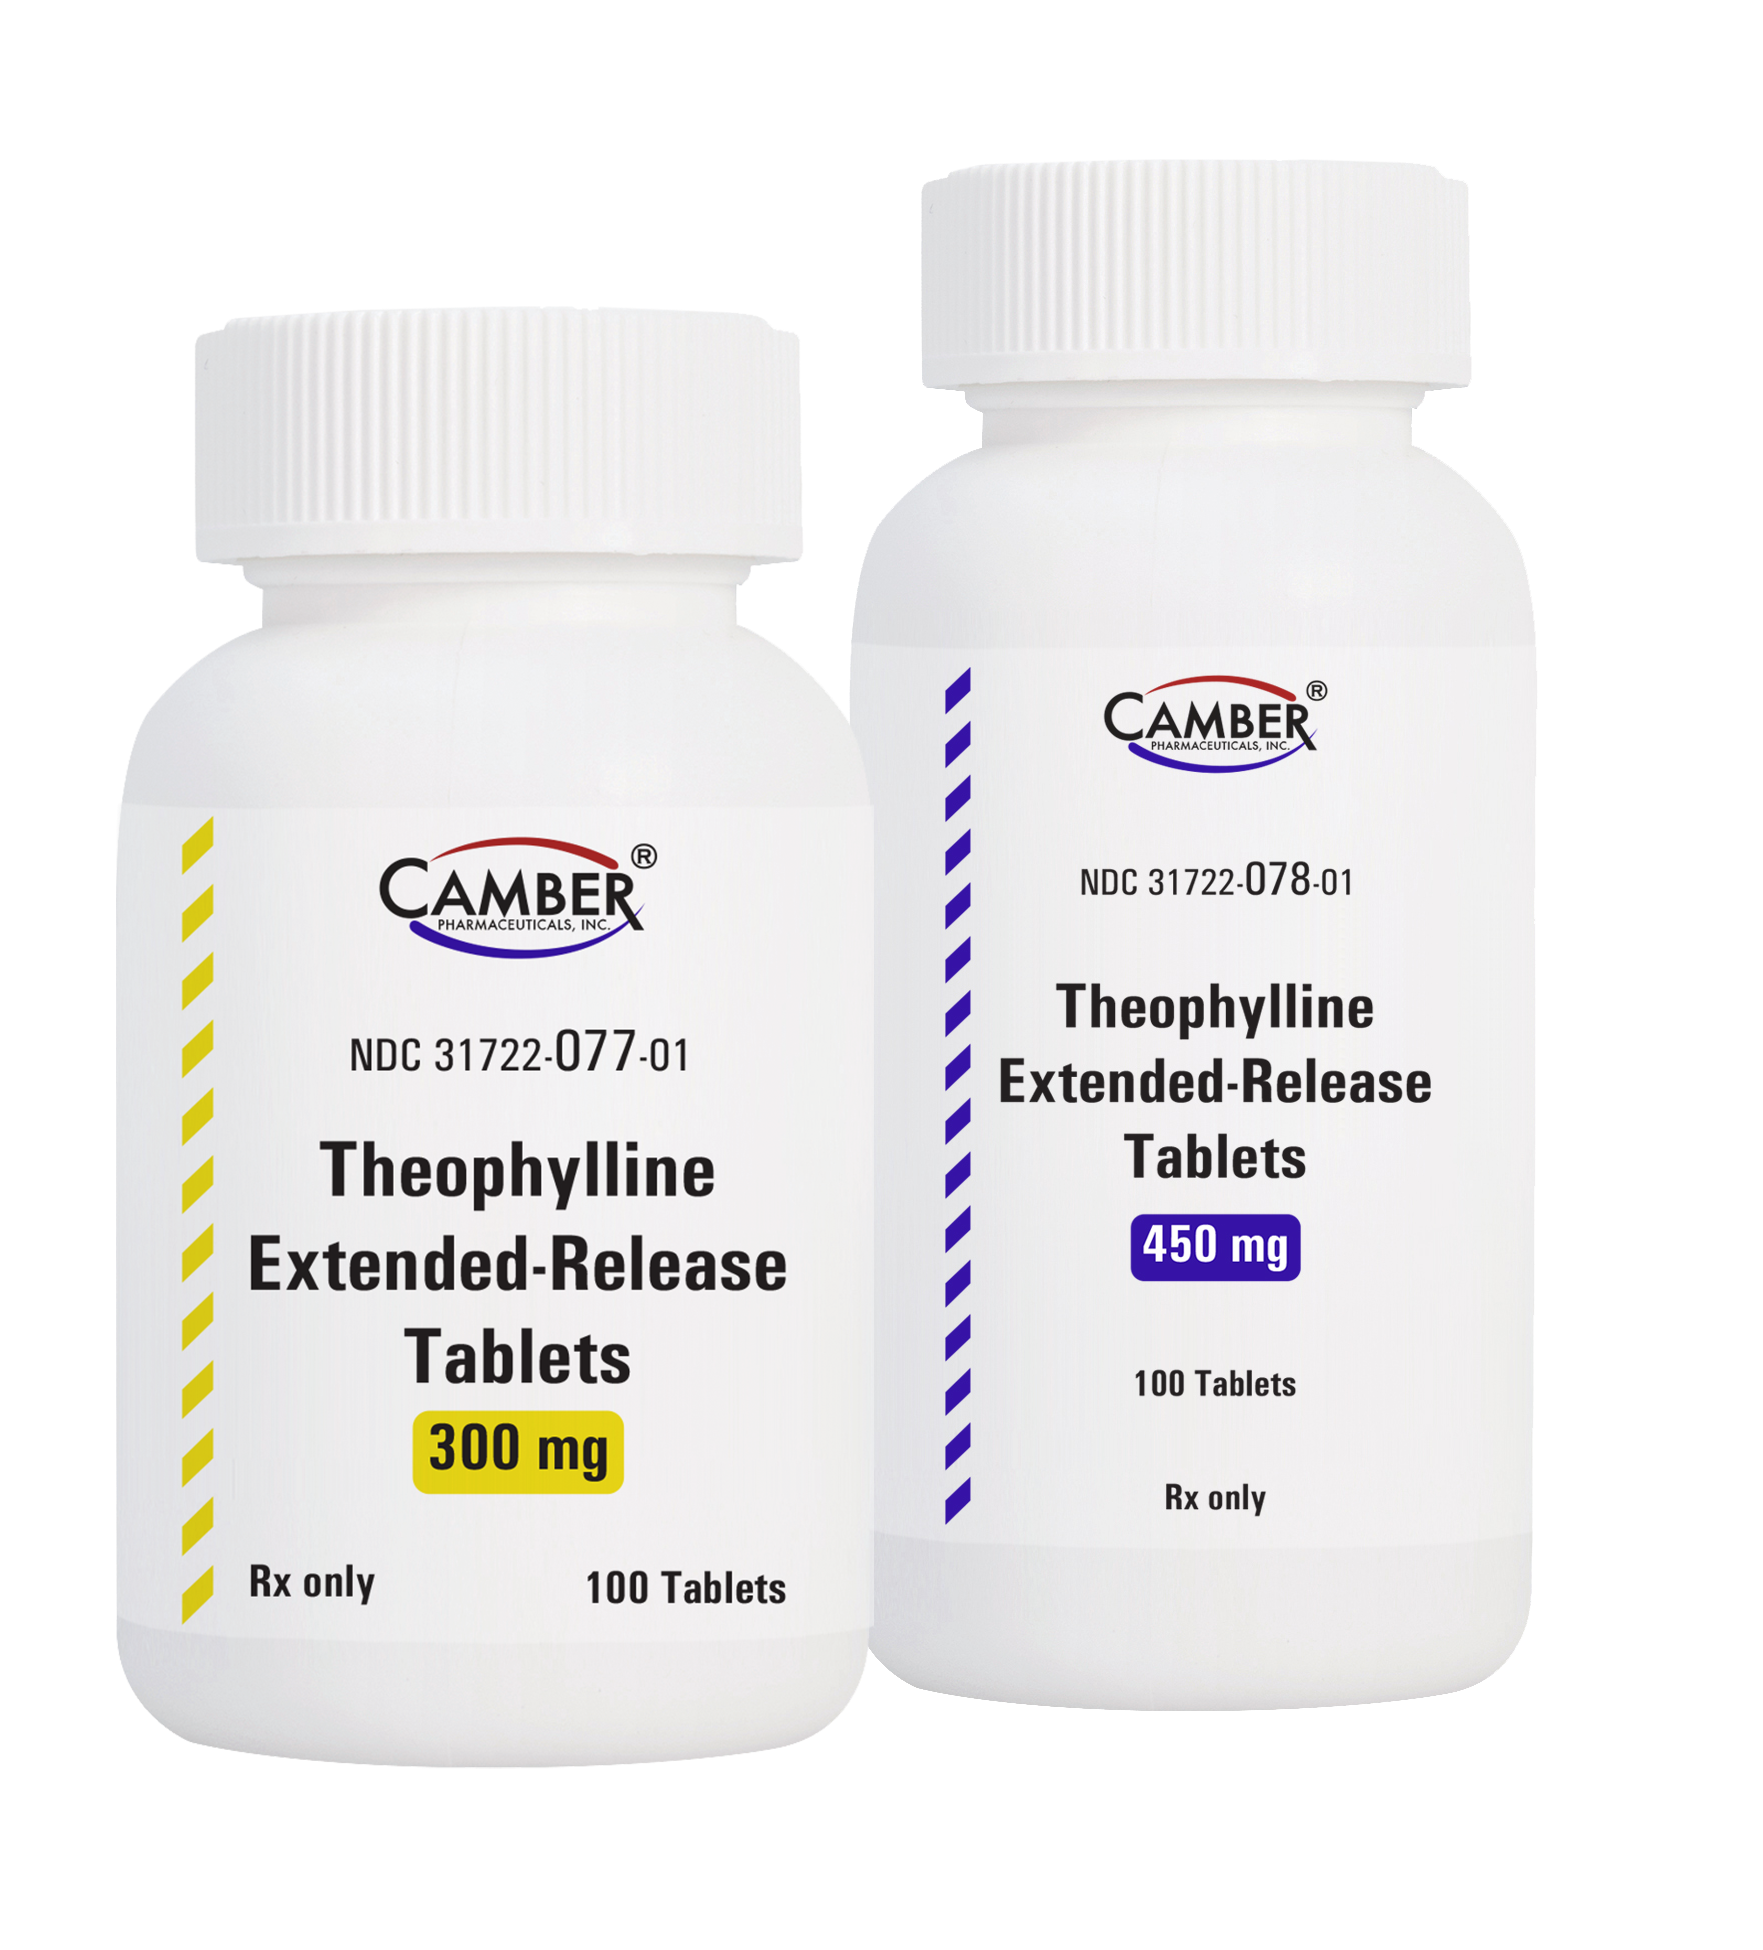 Camber Pharmaceuticals Launches Theophylline Extended-Release Tablets